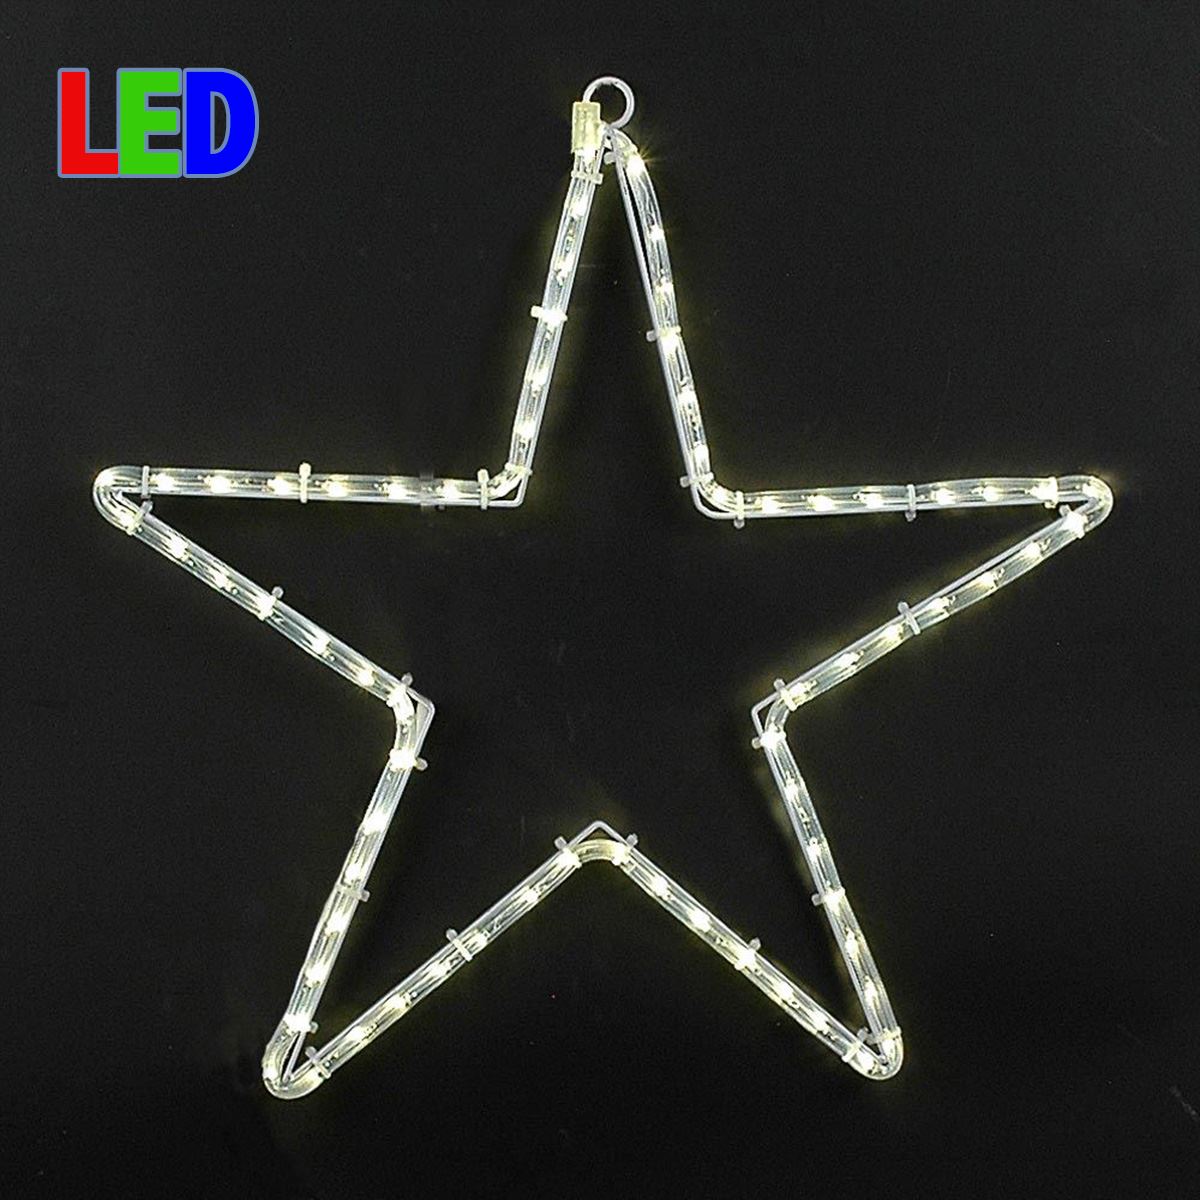 Picture of 24" Large Star Christmas LED Rope Light Motif